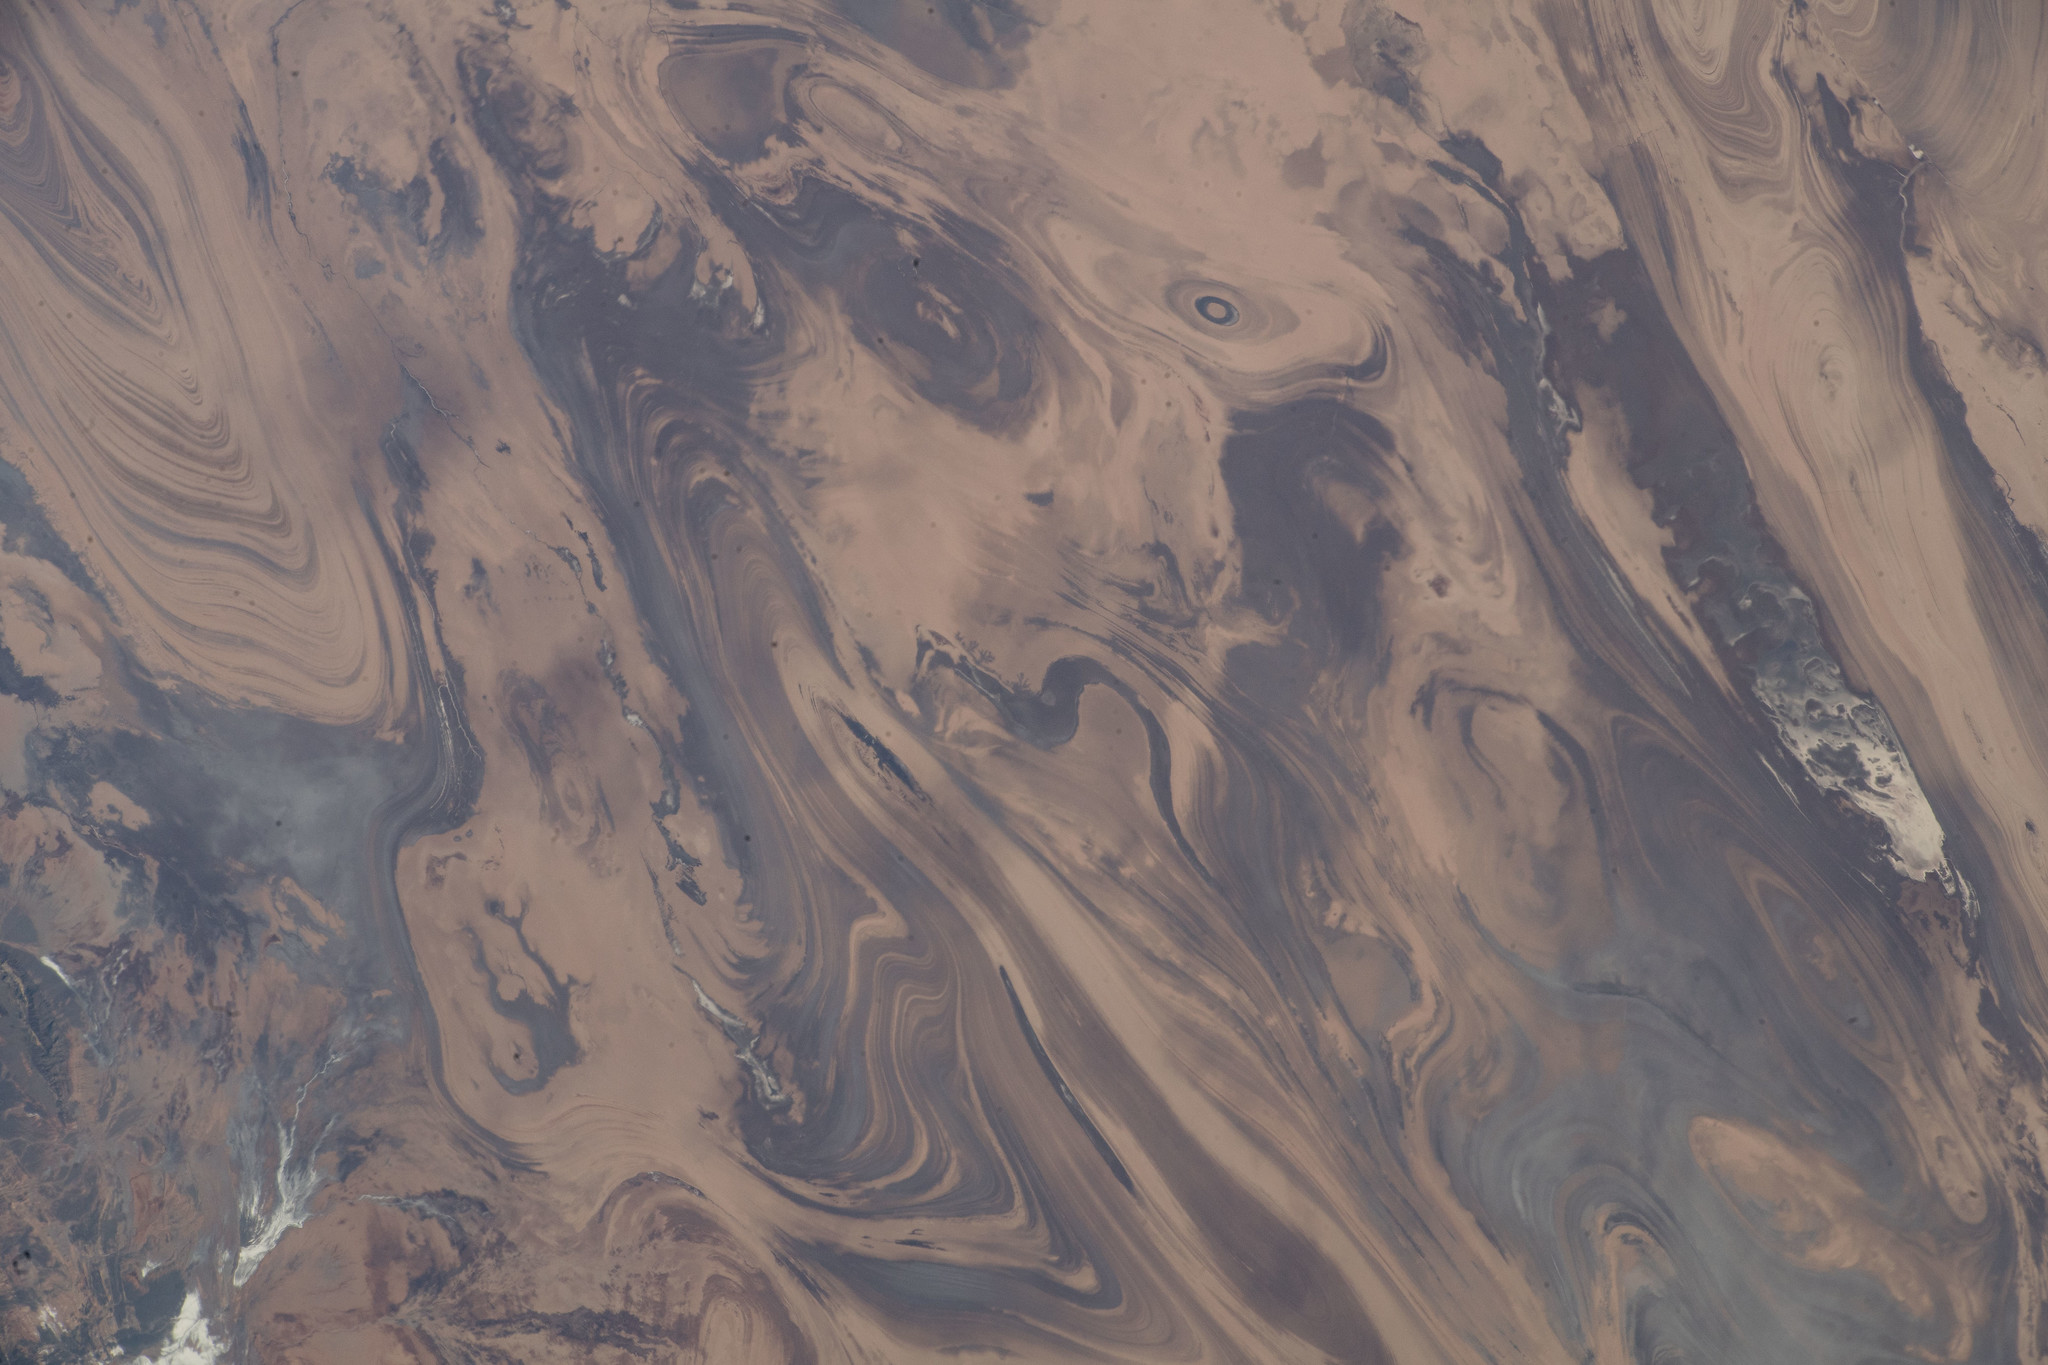 image of a desert on Earth